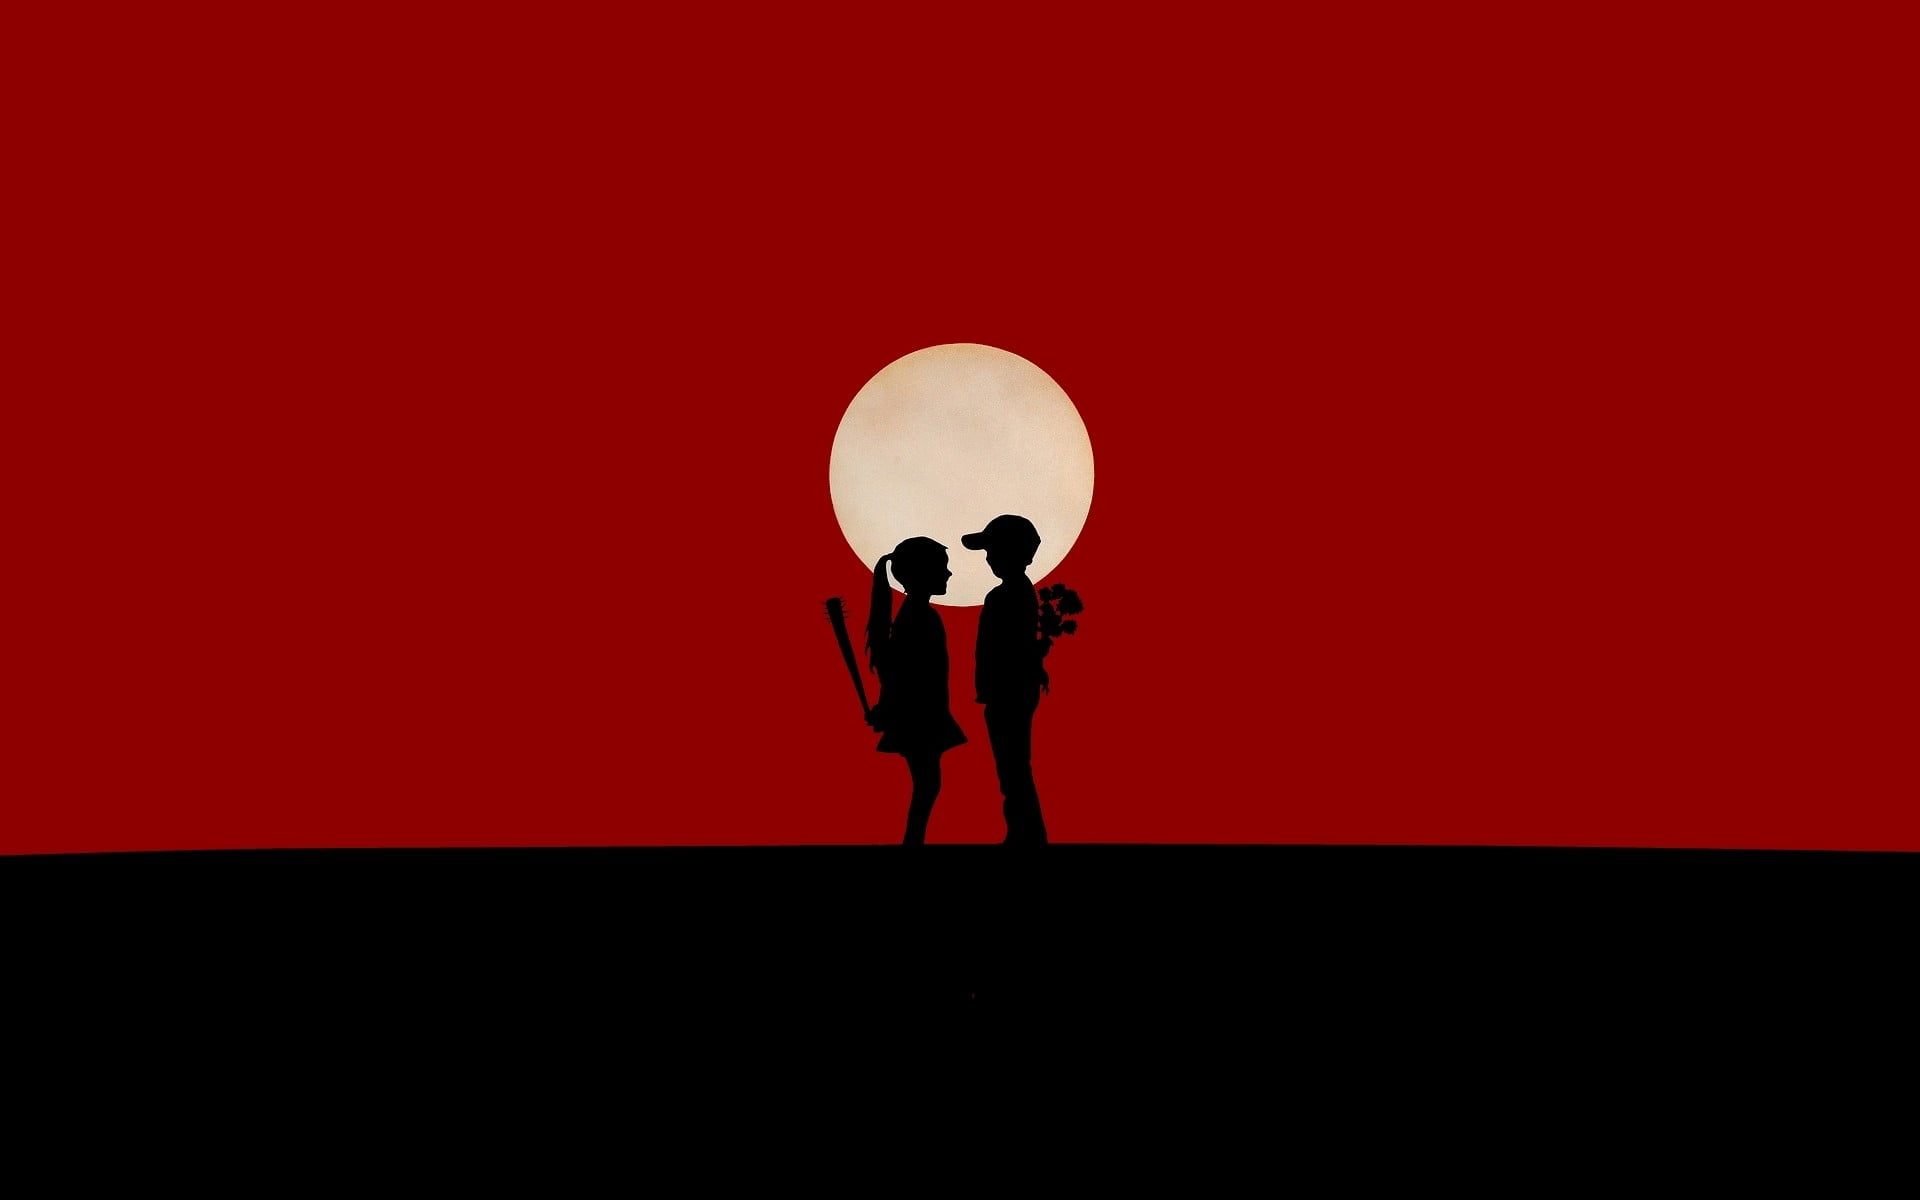 silhouette of boy and girl standing on moon